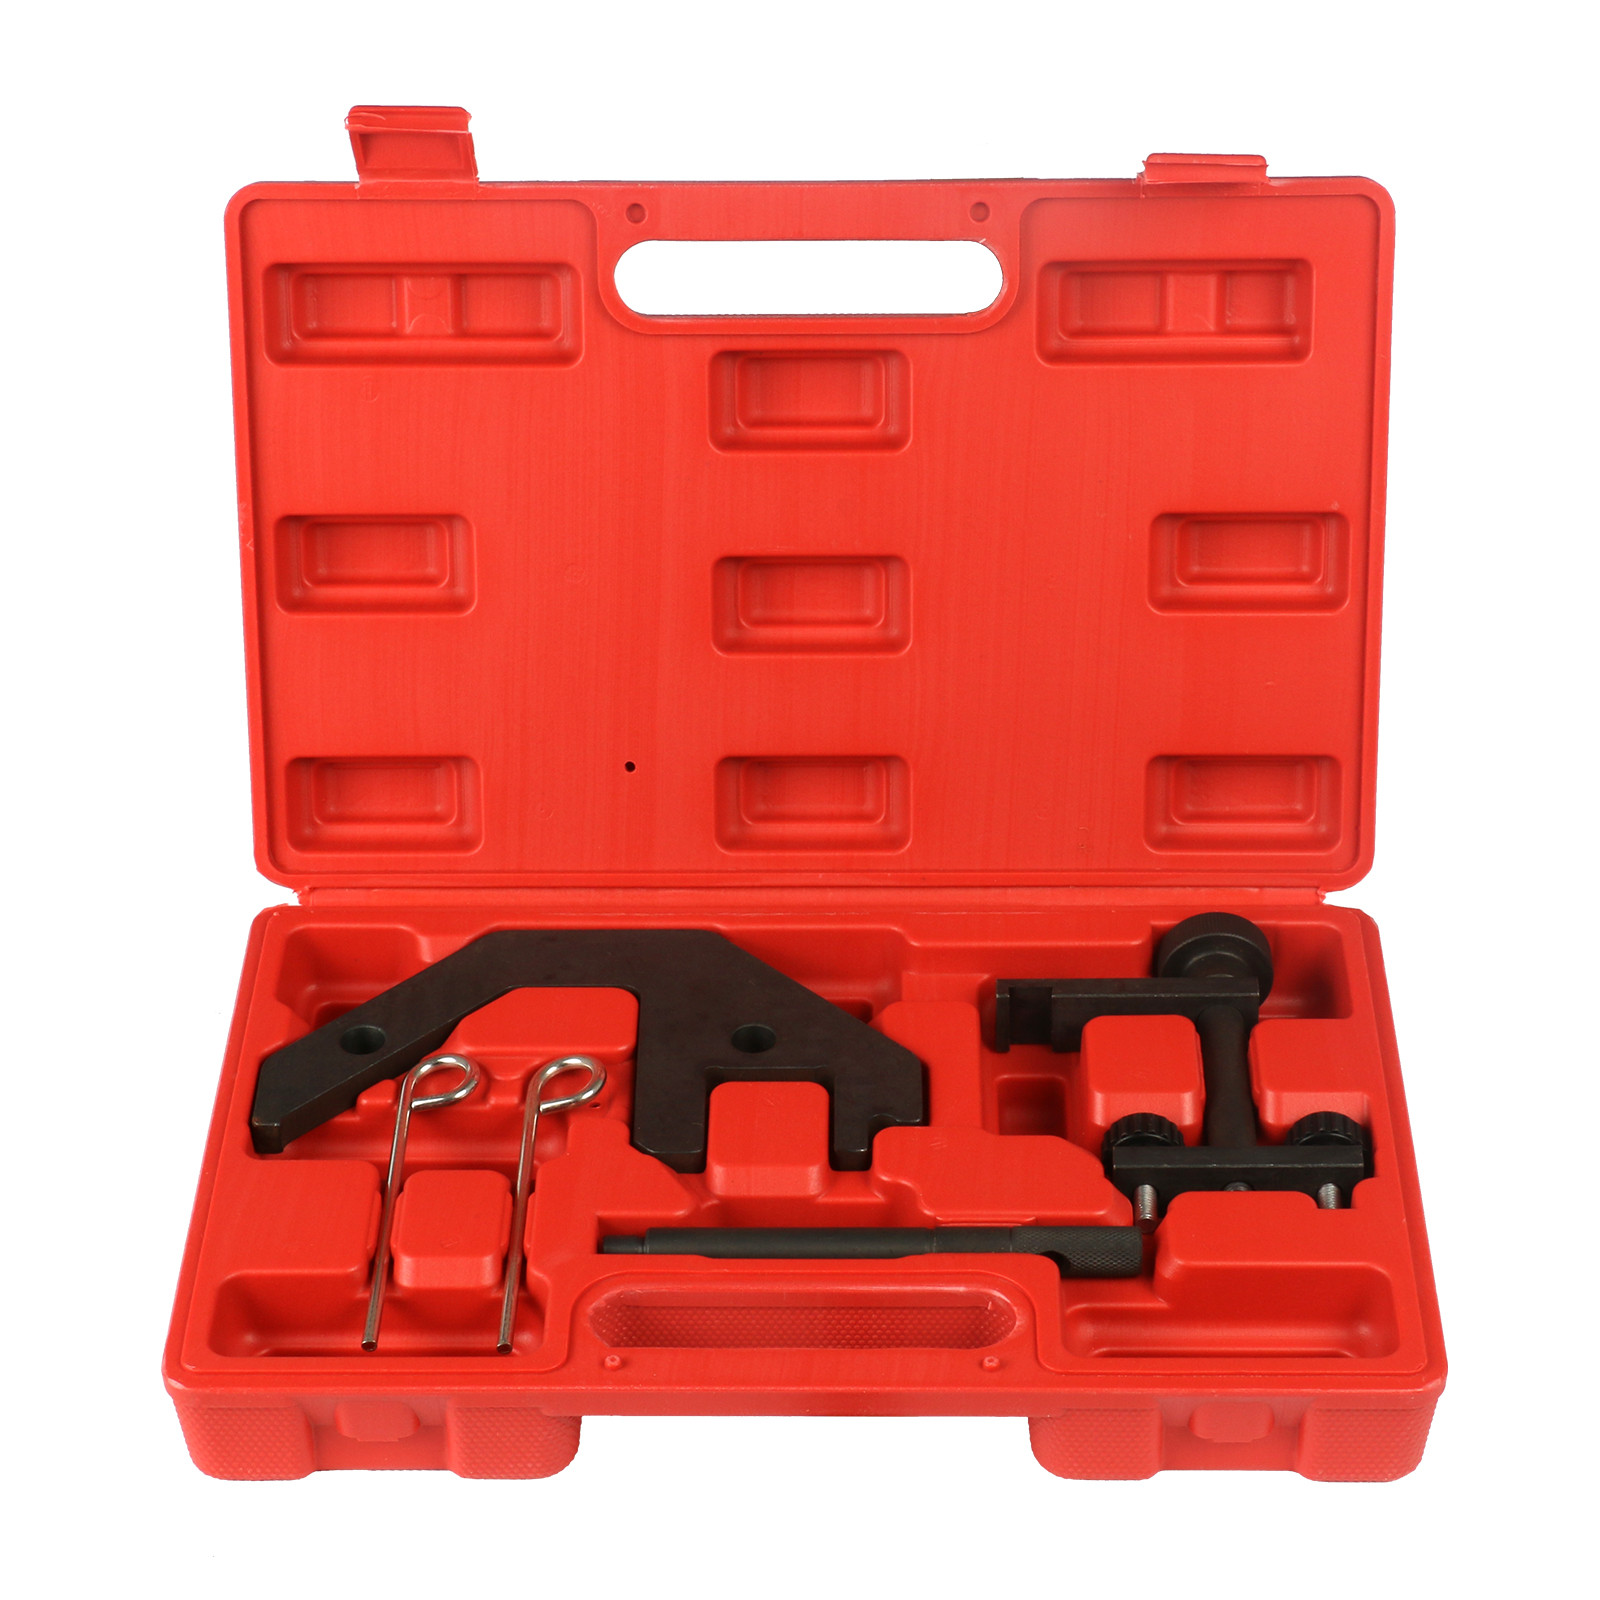 Bmw M47 2.0 Diesel Engine Oil Circuits Engine Timing Locking Camshaft Alignment tool Set for Bmw 2.0 3.0 ...